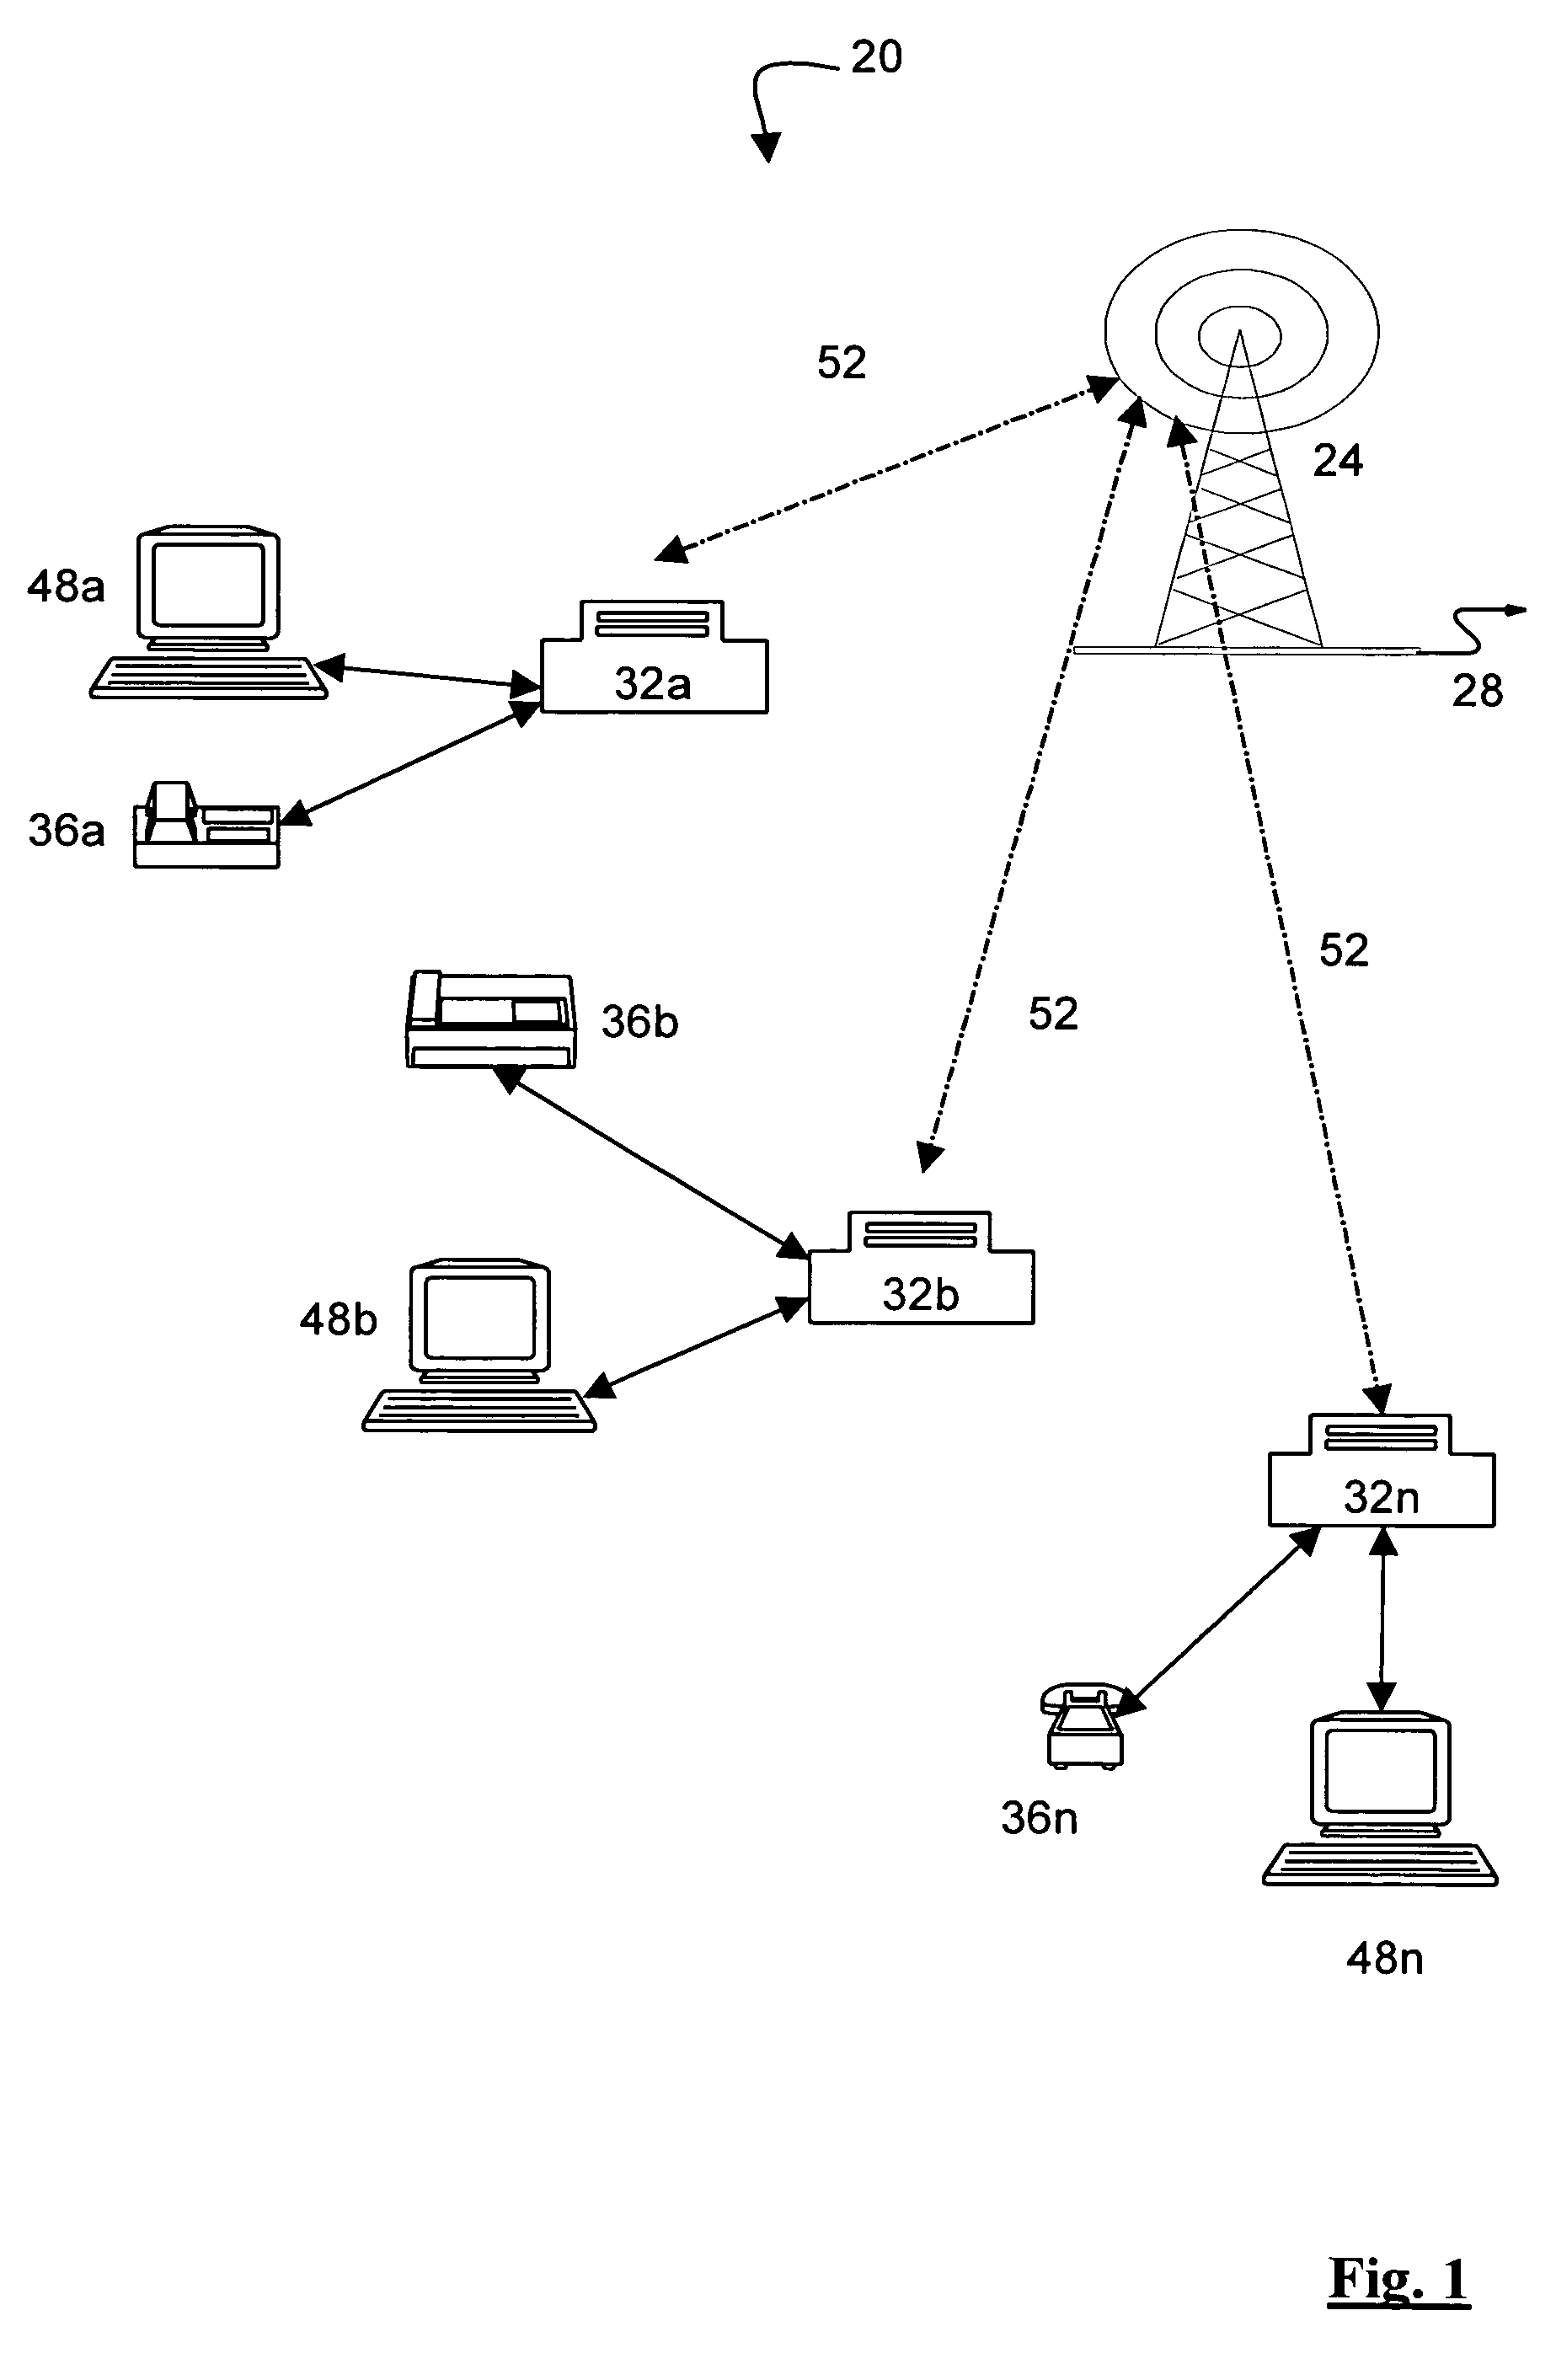 Communication structure with channels configured responsive to reception quality